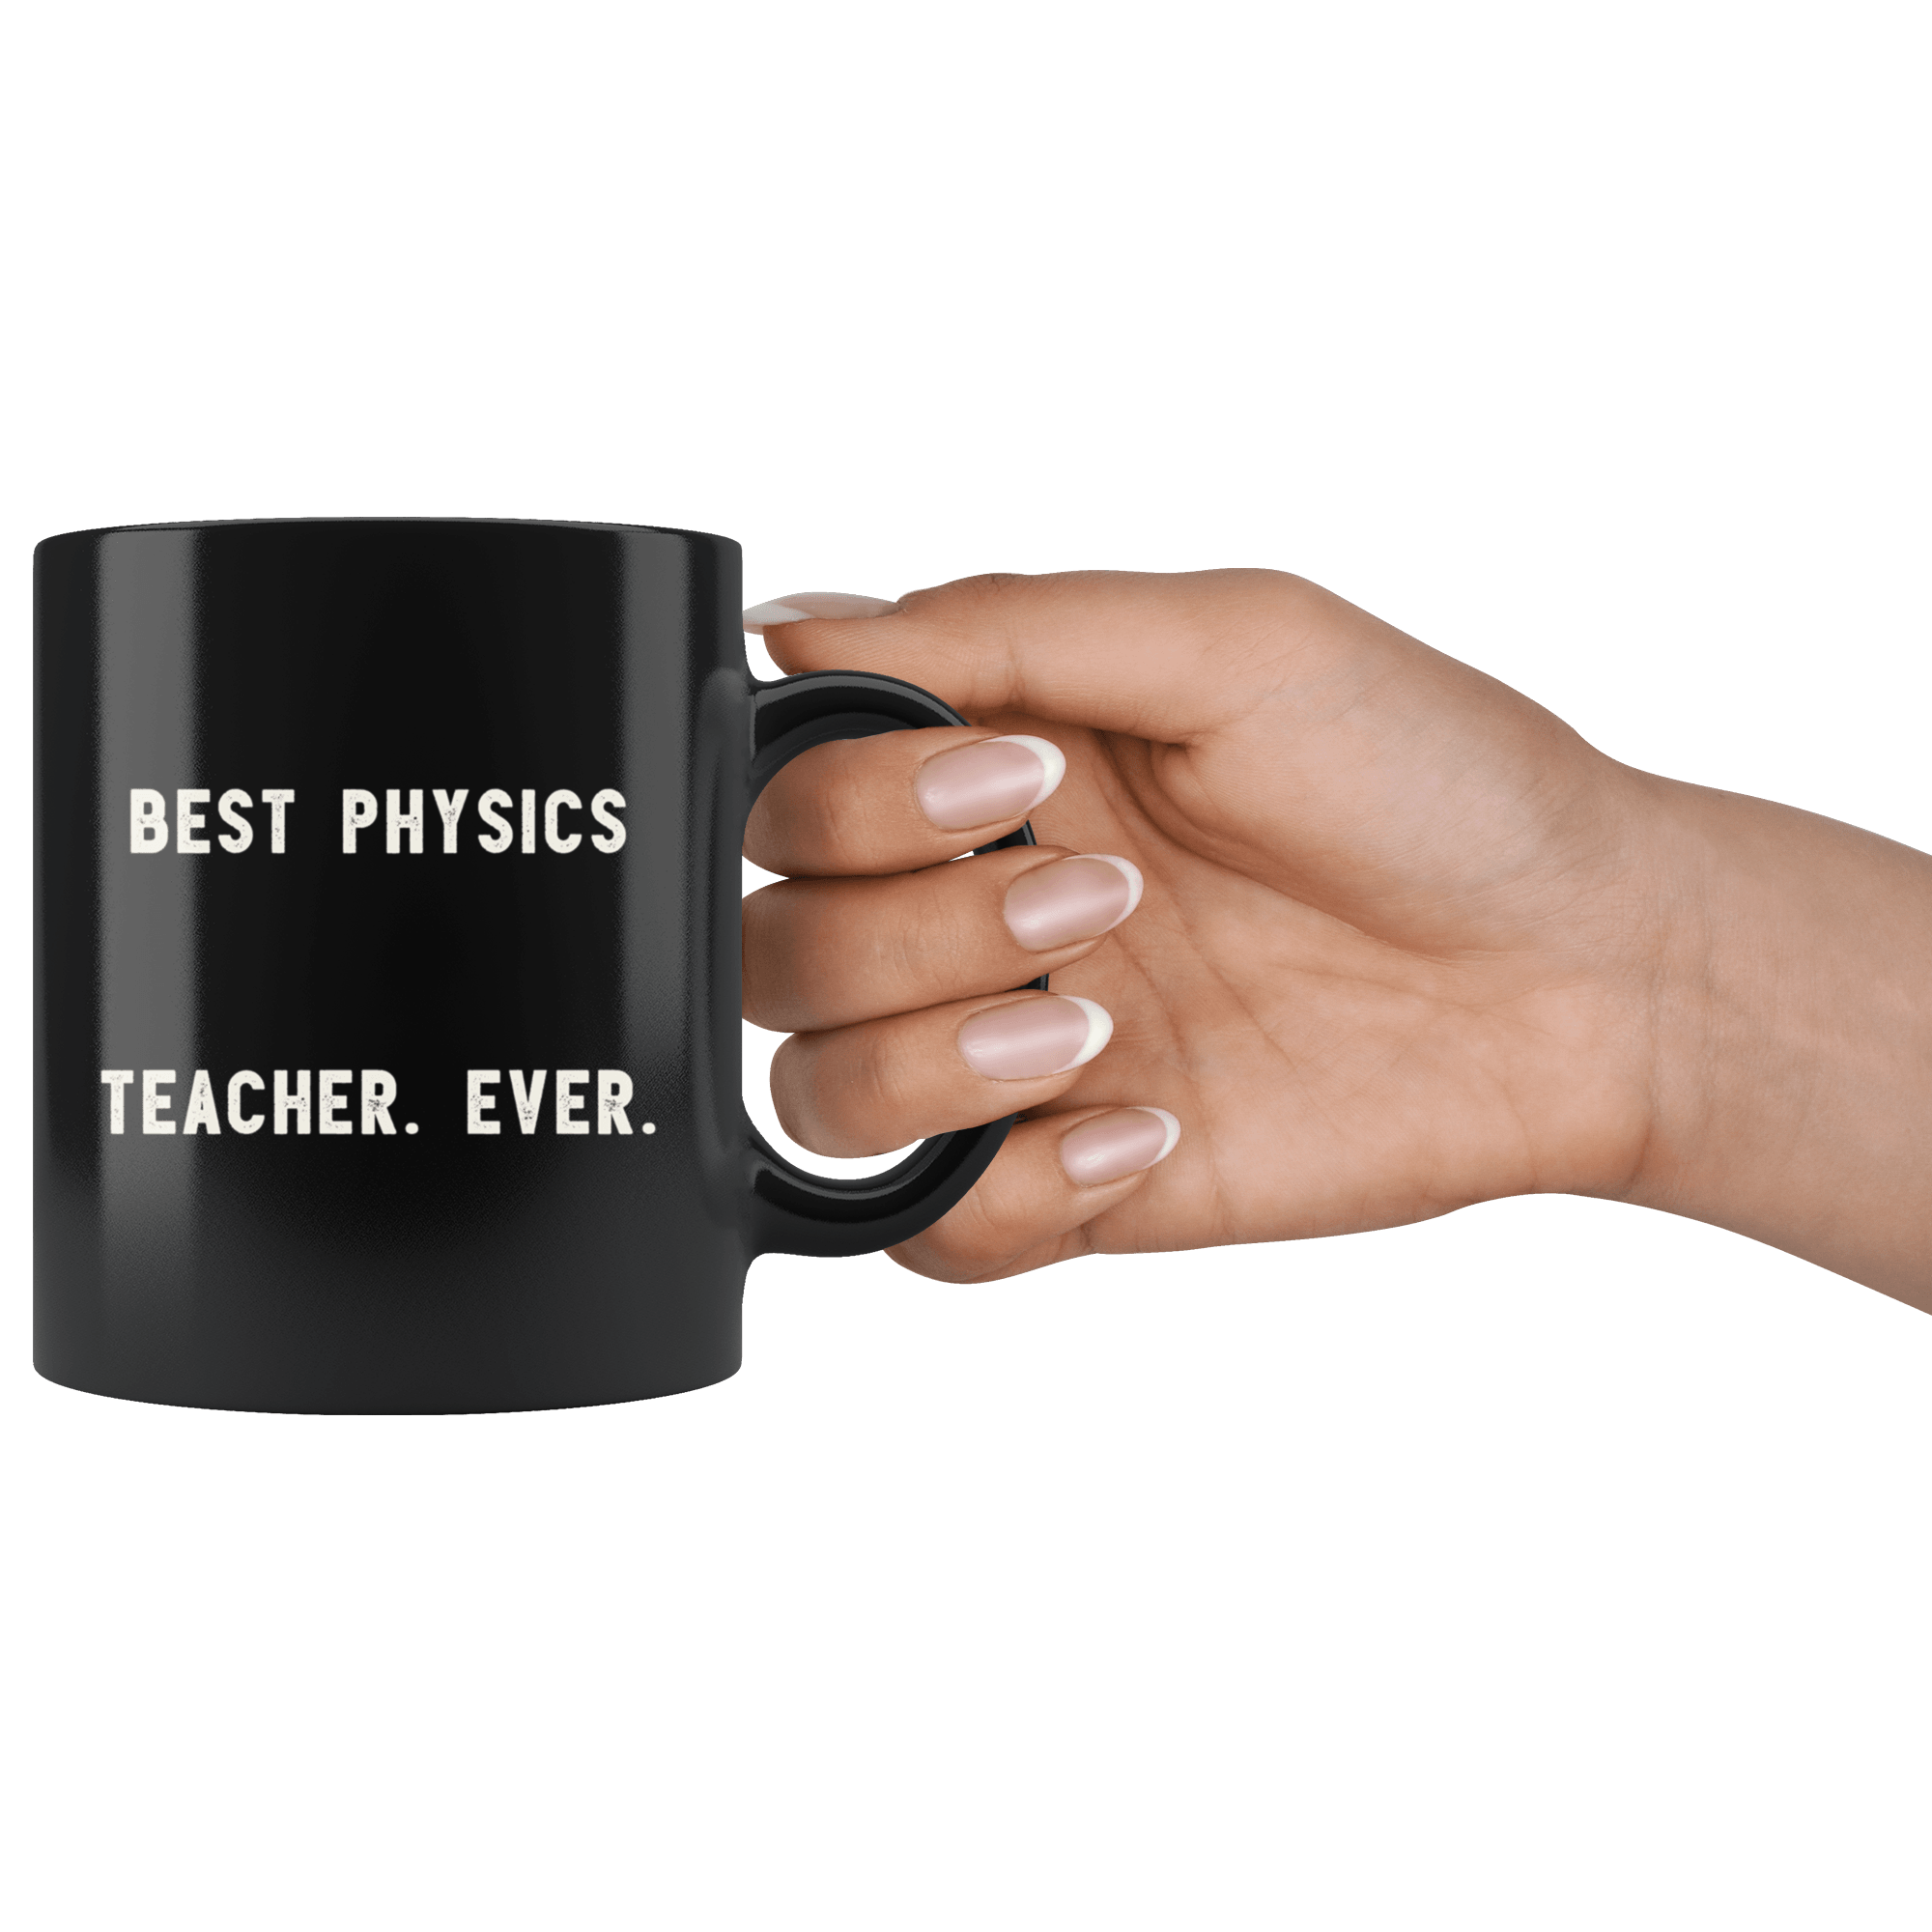 22 Of The Coolest Science Gifts For Adults